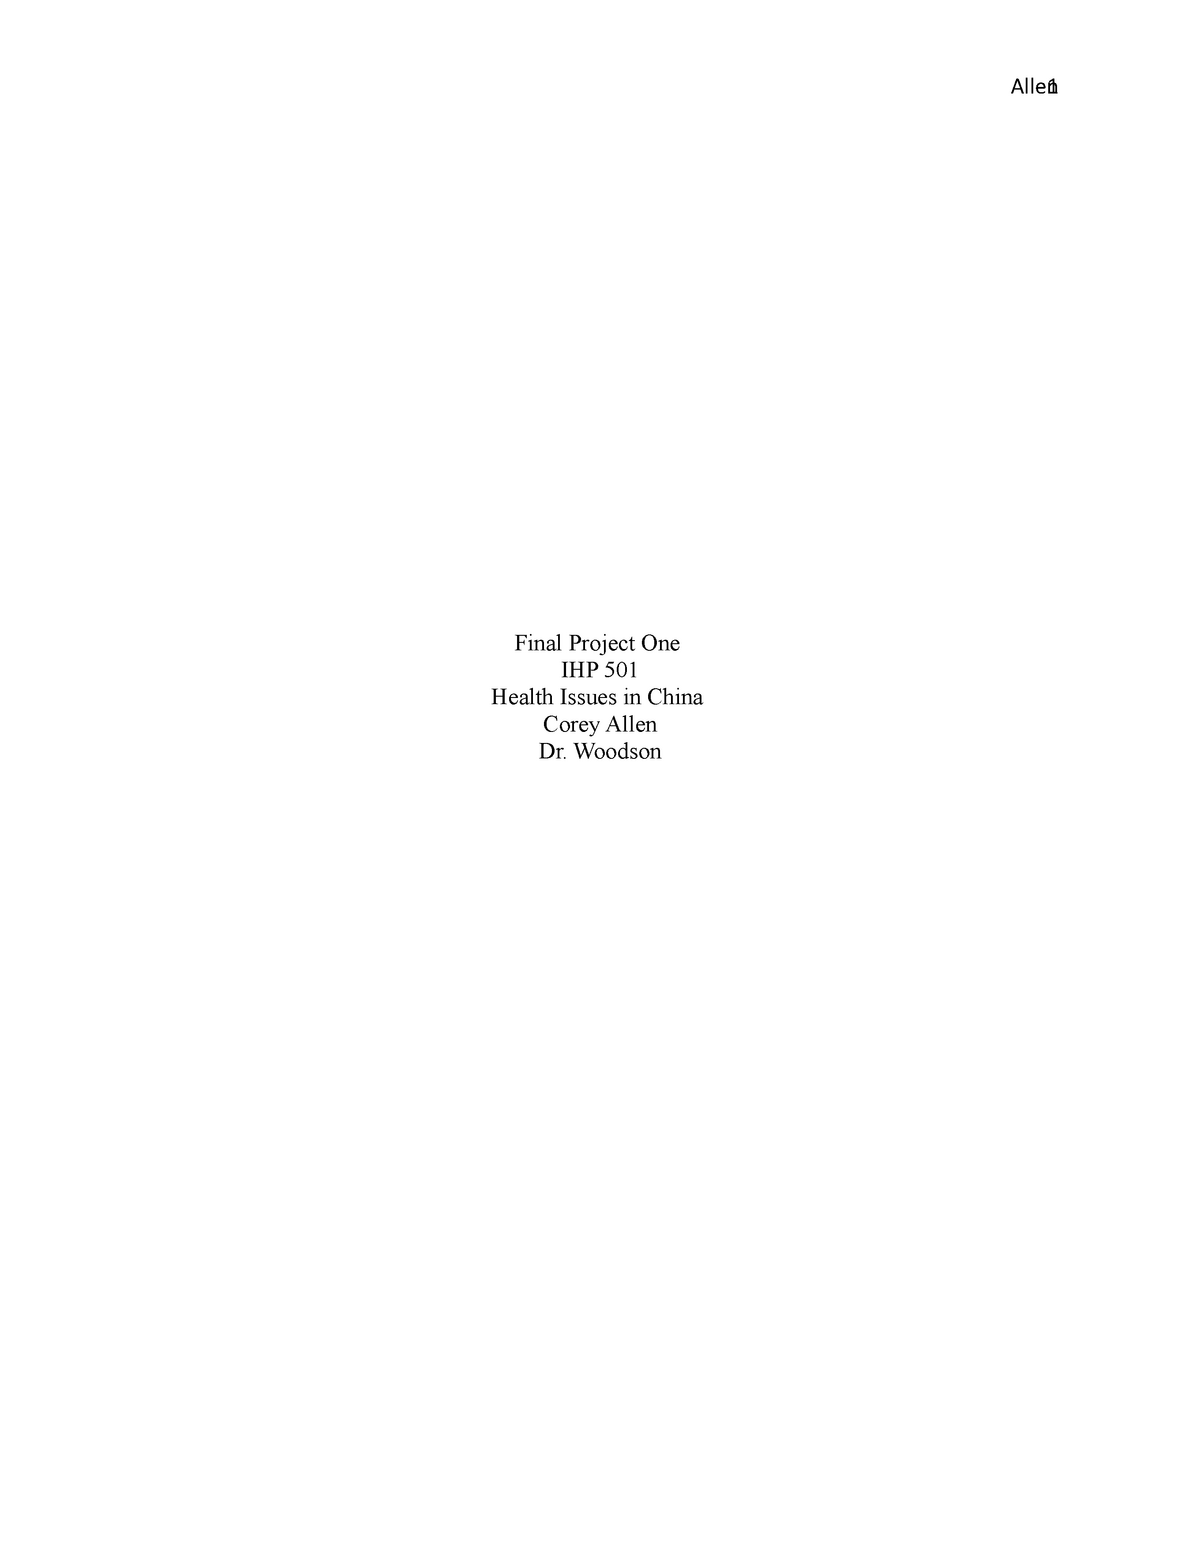 IHP 501 Final Project One Full Paper - Final Project One IHP 501 Health ...